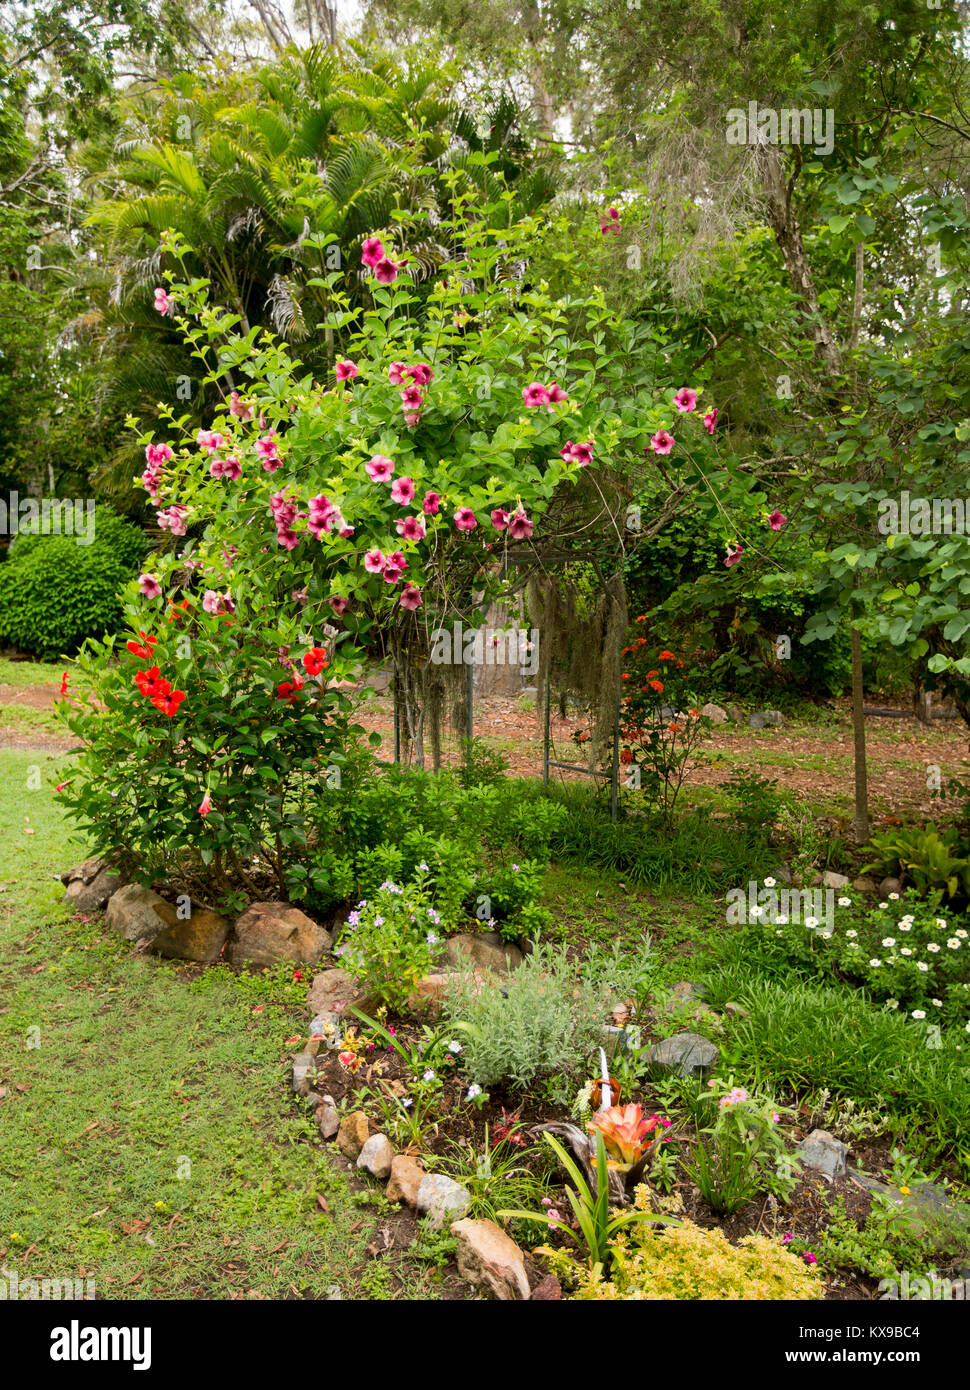 Climbing plant, Allamanda blanchettii with mass of red / purple flowers and green foliage growing on arch in Australian garden Stock Photo